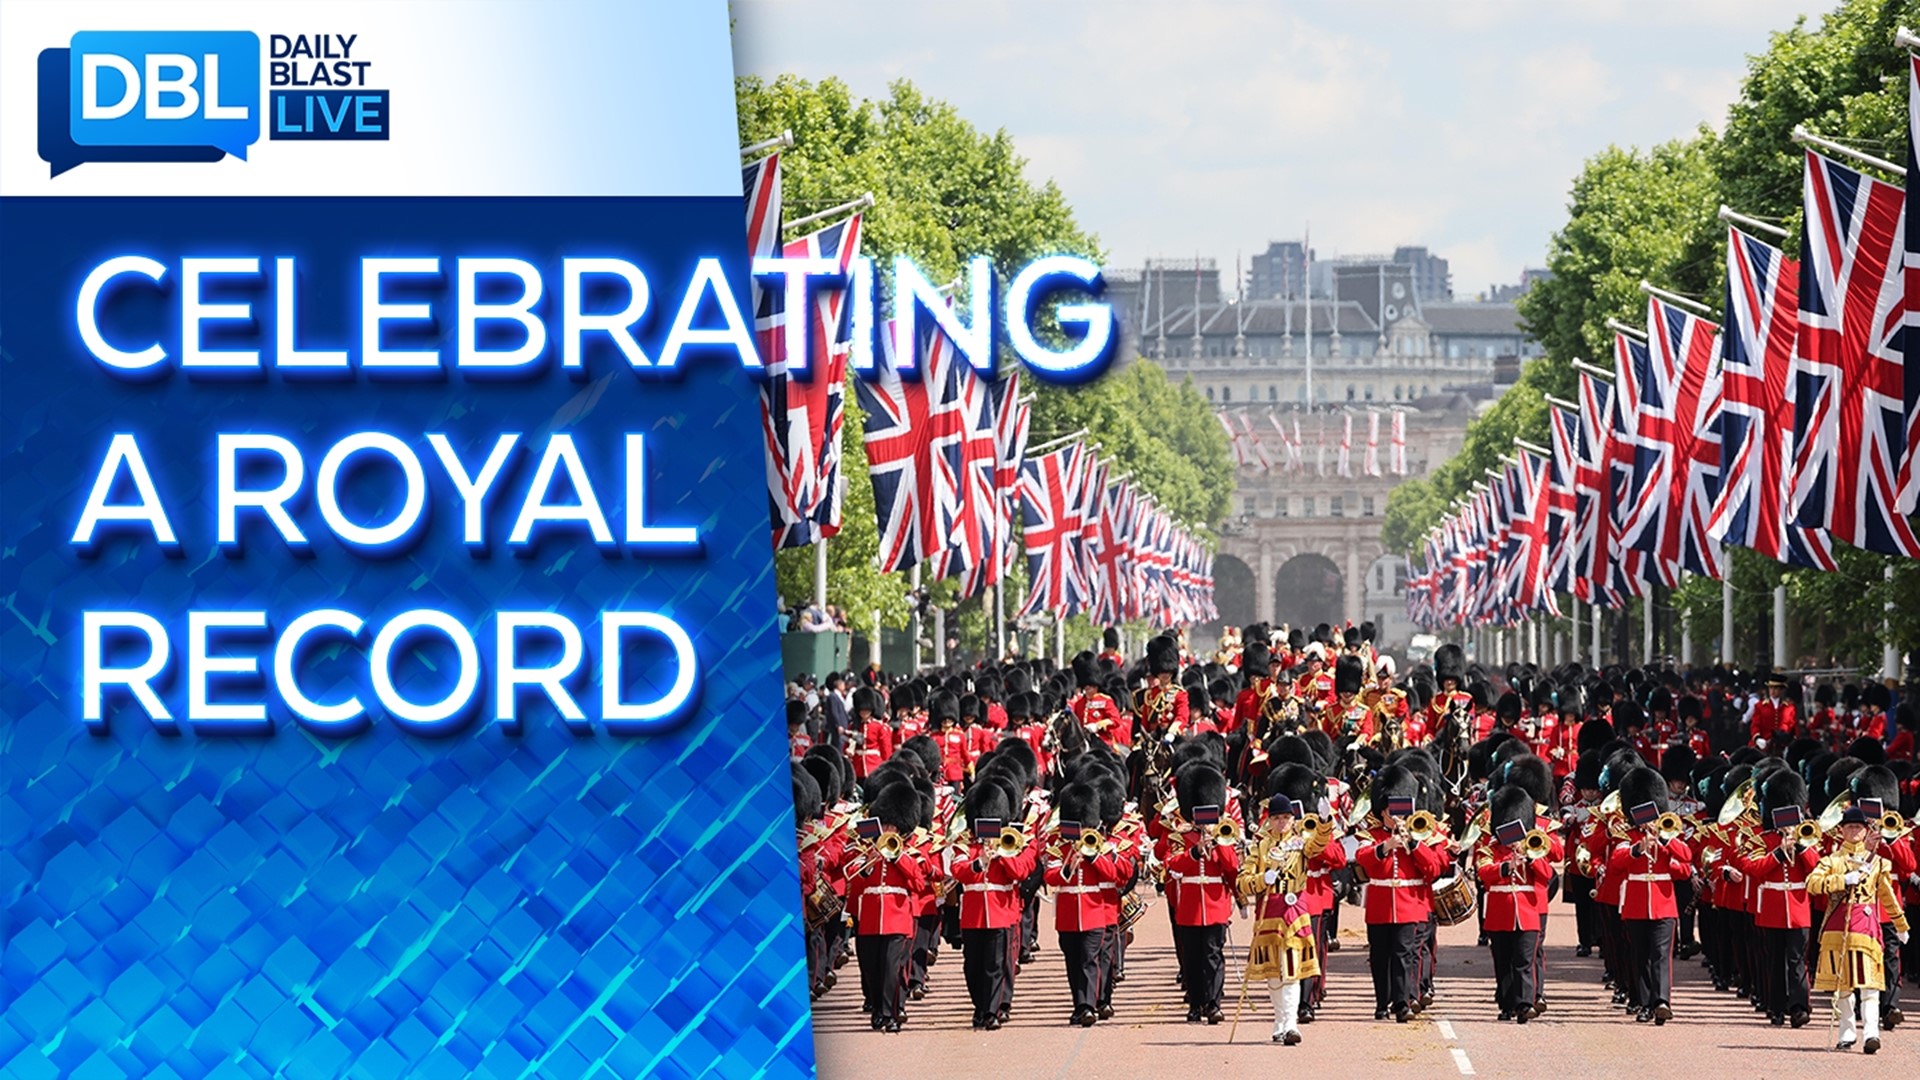 Celebration is underway in London as Queen Elizabeth II marks 70 years on the throne, making her the first British Monarch to celebrate a Platinum Jubilee.